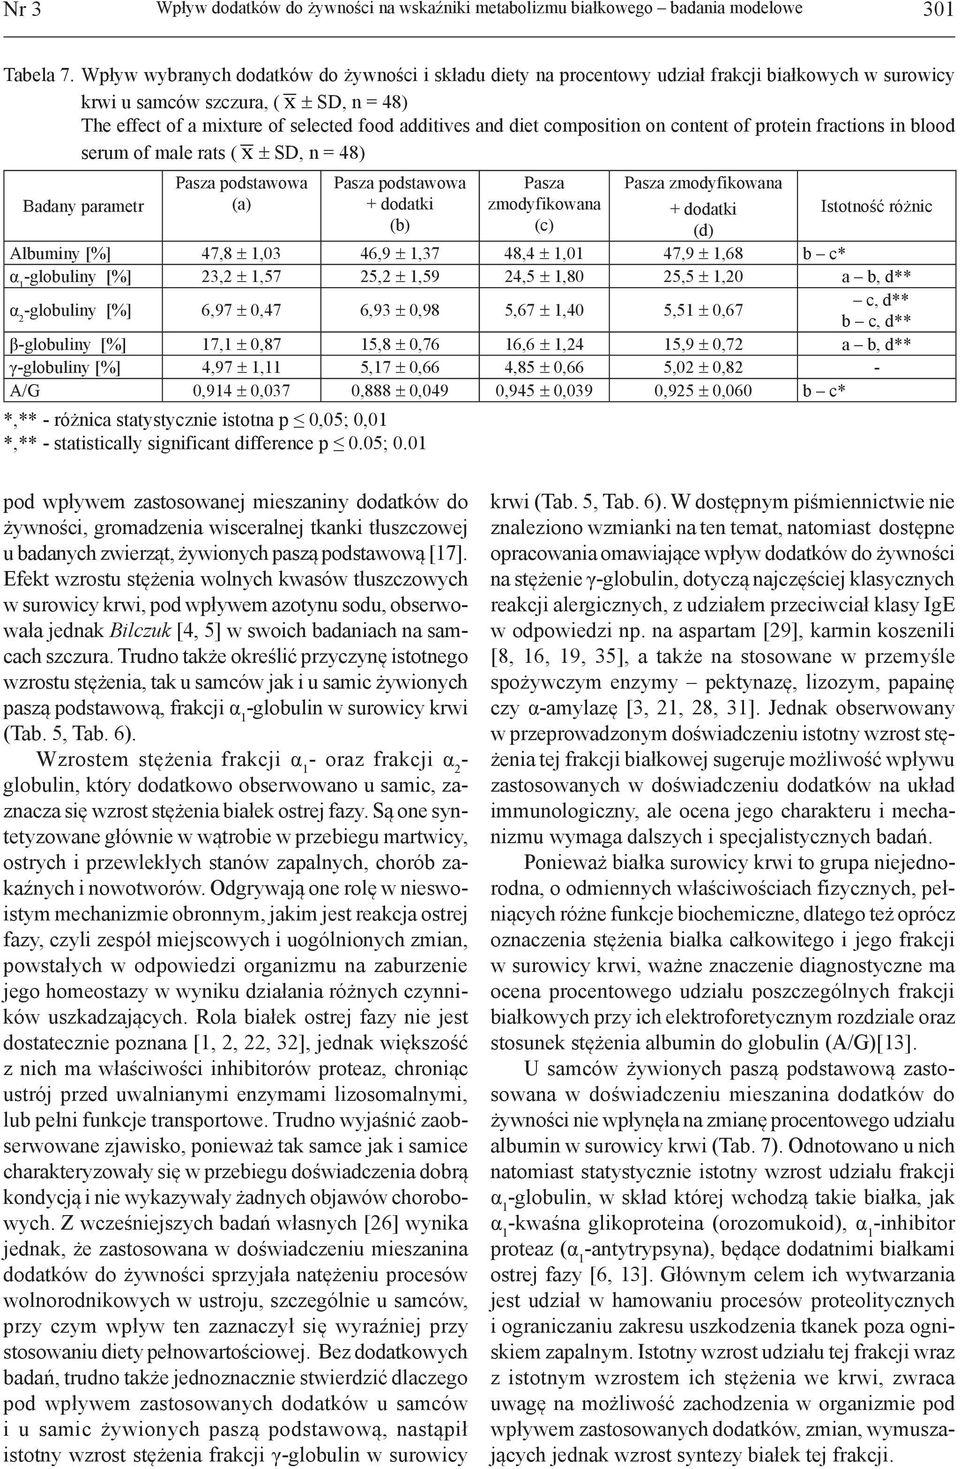 diet composition on content of protein fractions in blood serum of male rats ( x ± SD, n = 48) podstawowa podstawowa (a) Istotność różnic (b) (c) (d) Albuminy [%] 47,8 ± 1,03 46,9 ± 1,37 48,4 ± 1,01